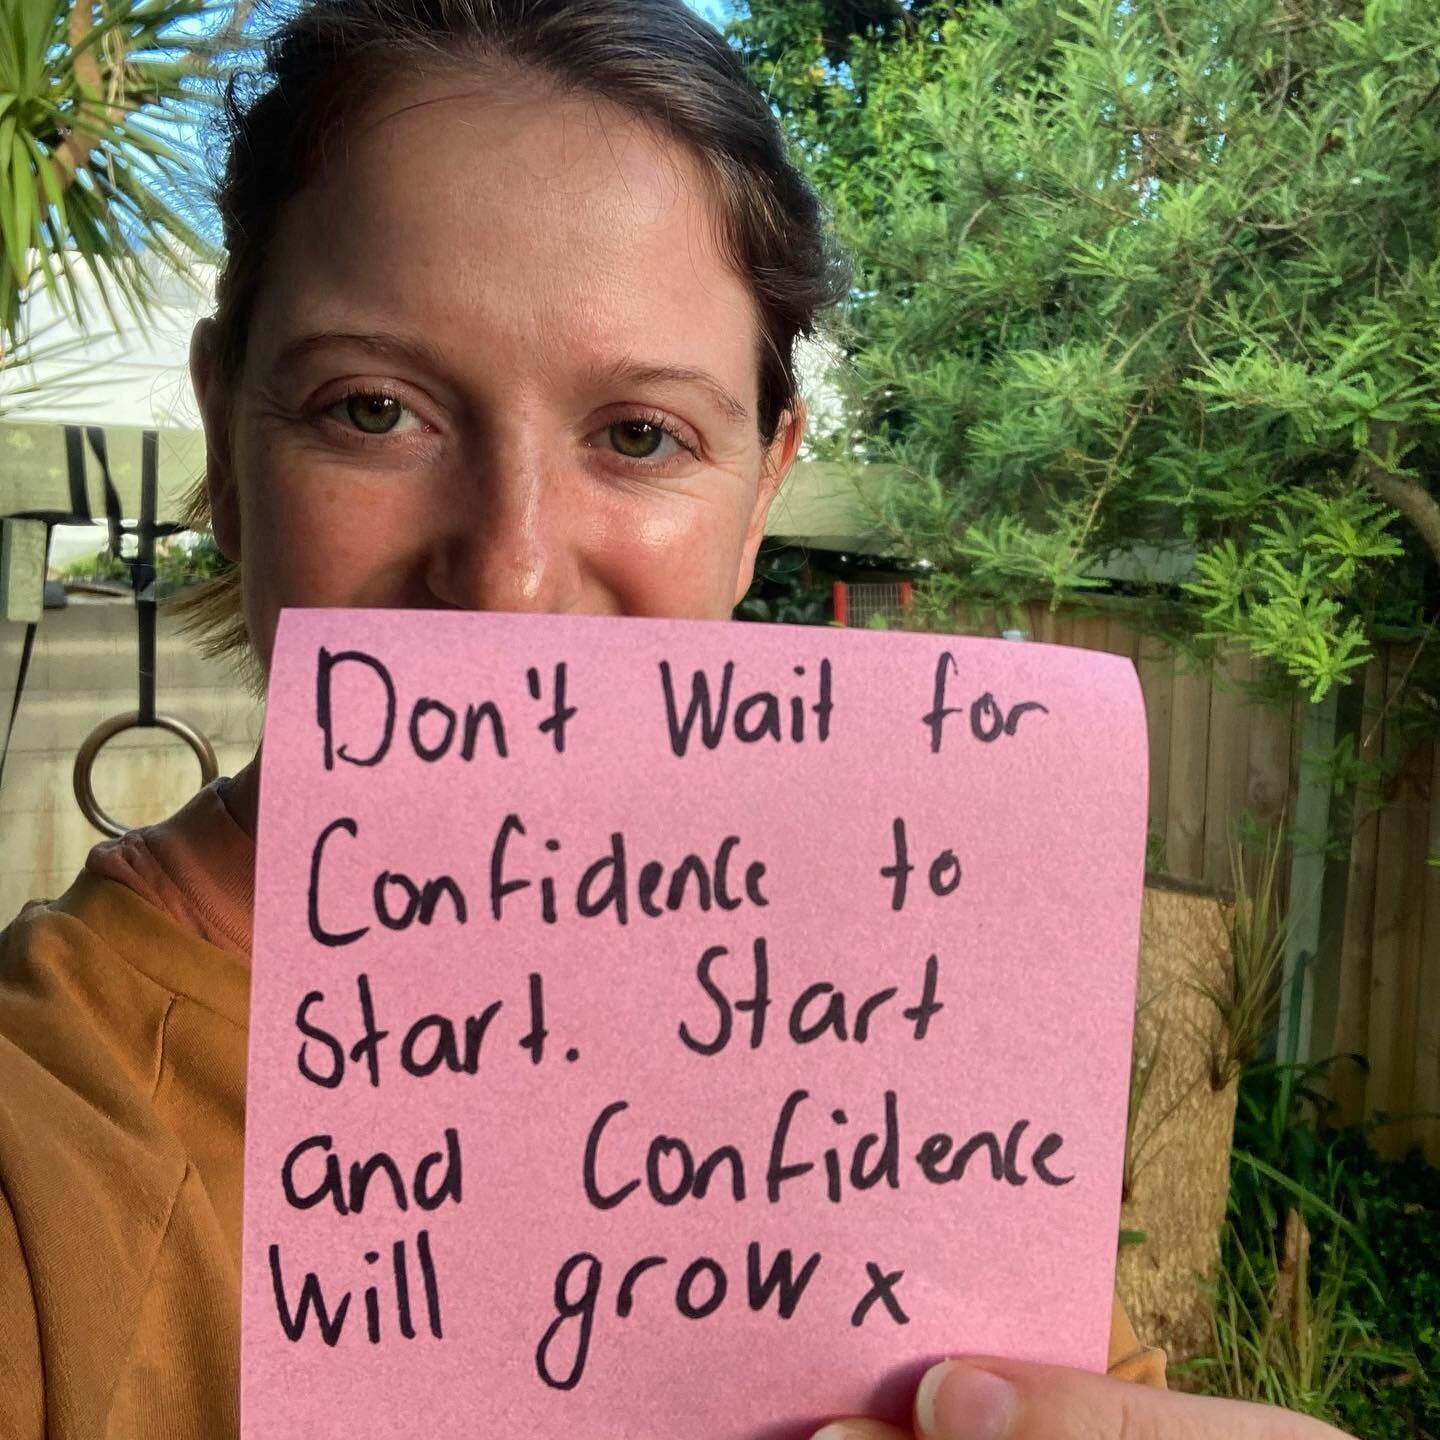 More confidence anyone 🙌🌸

But don&rsquo;t wait for confidence. Confidence comes from doing, learning, making mistakes and fixing those mistakes 🚴&zwj;♀️. 

Instead of waiting for confidence focus on courage. Courage to take the risk to take a ste